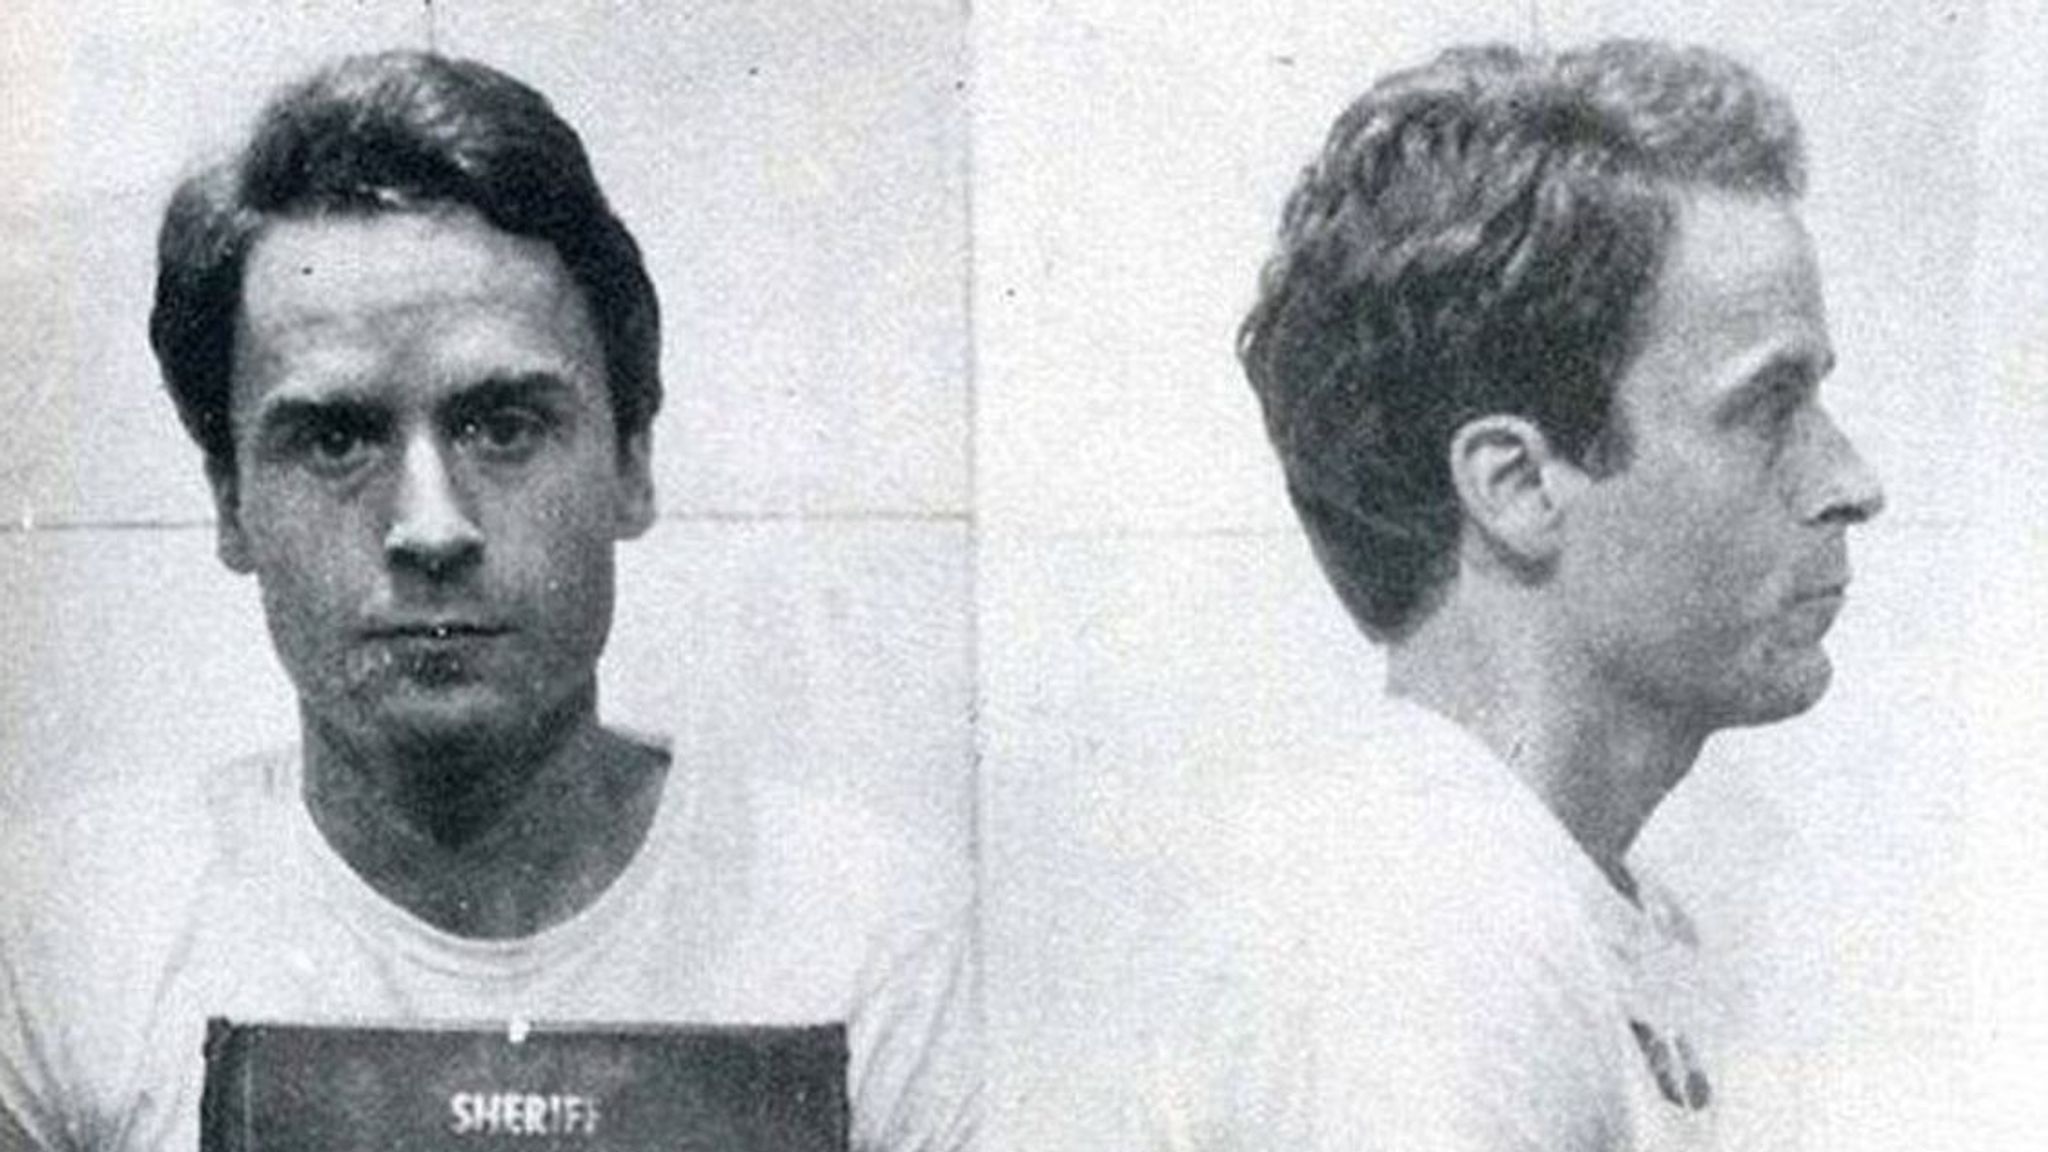 Zac Efron On Serial Killer Ted Bundy History Must Never Be Repeated